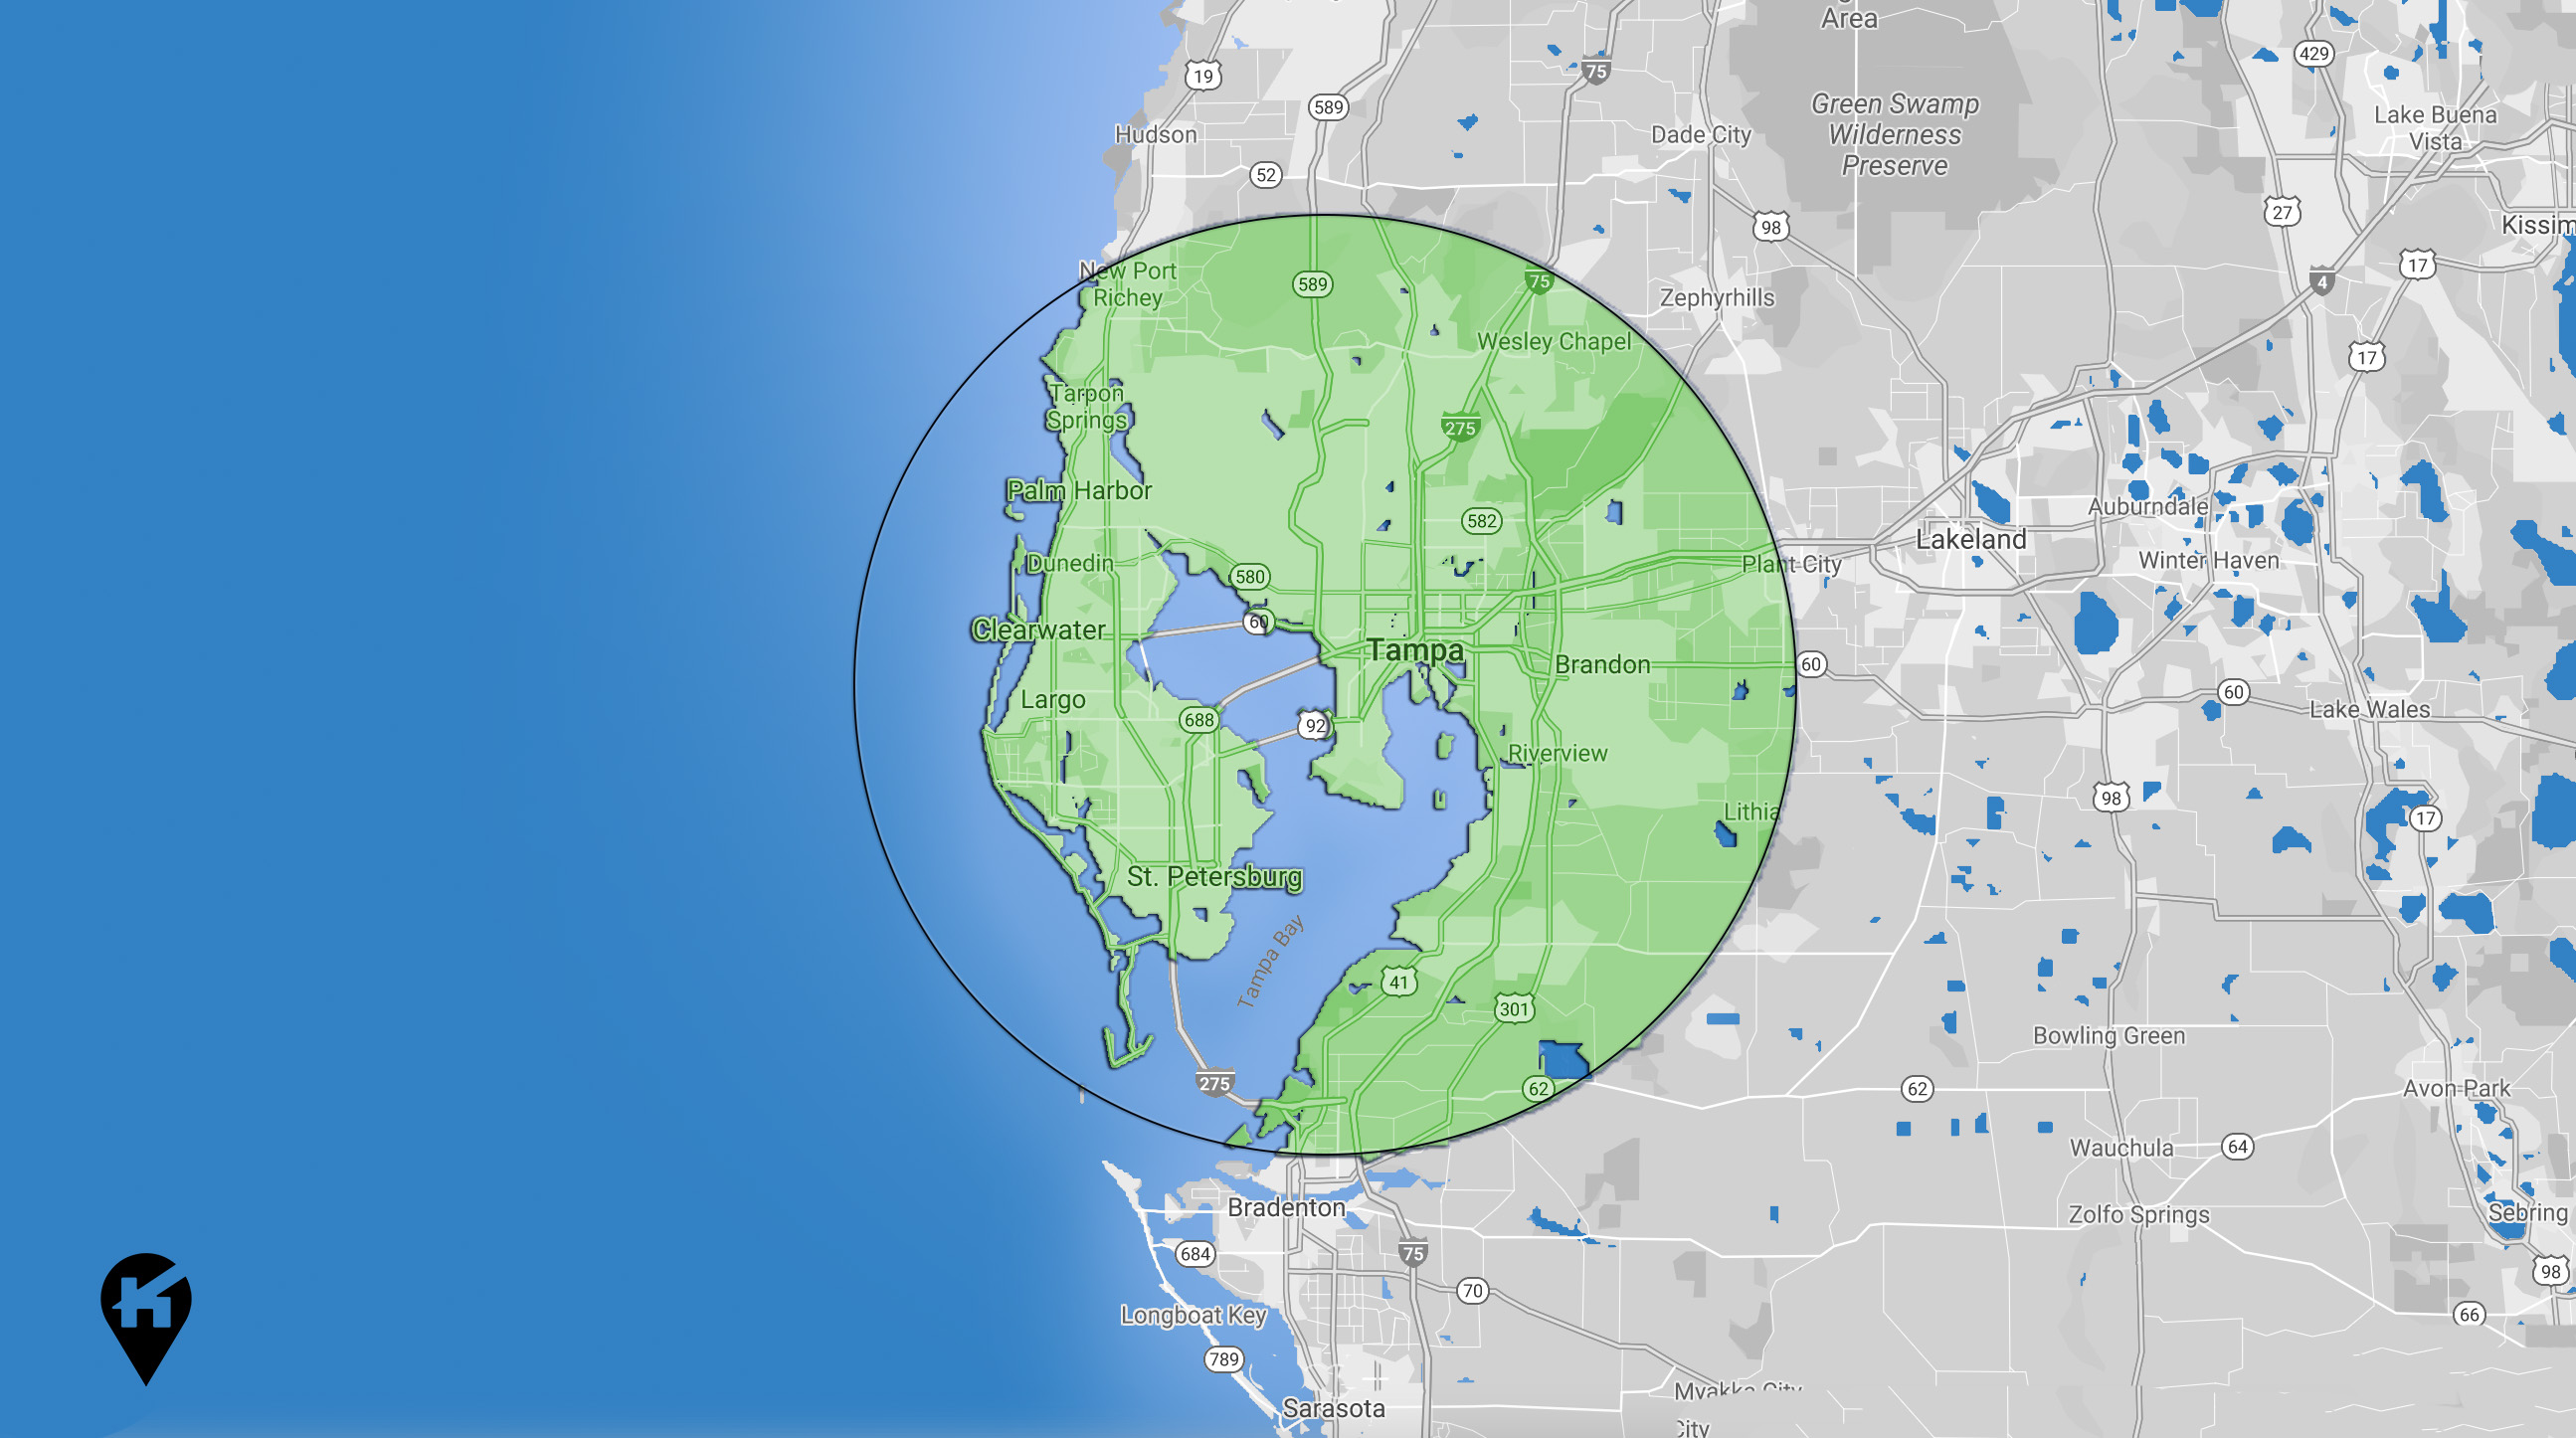 Tampa Bay Area Map - Kris Kennedy team